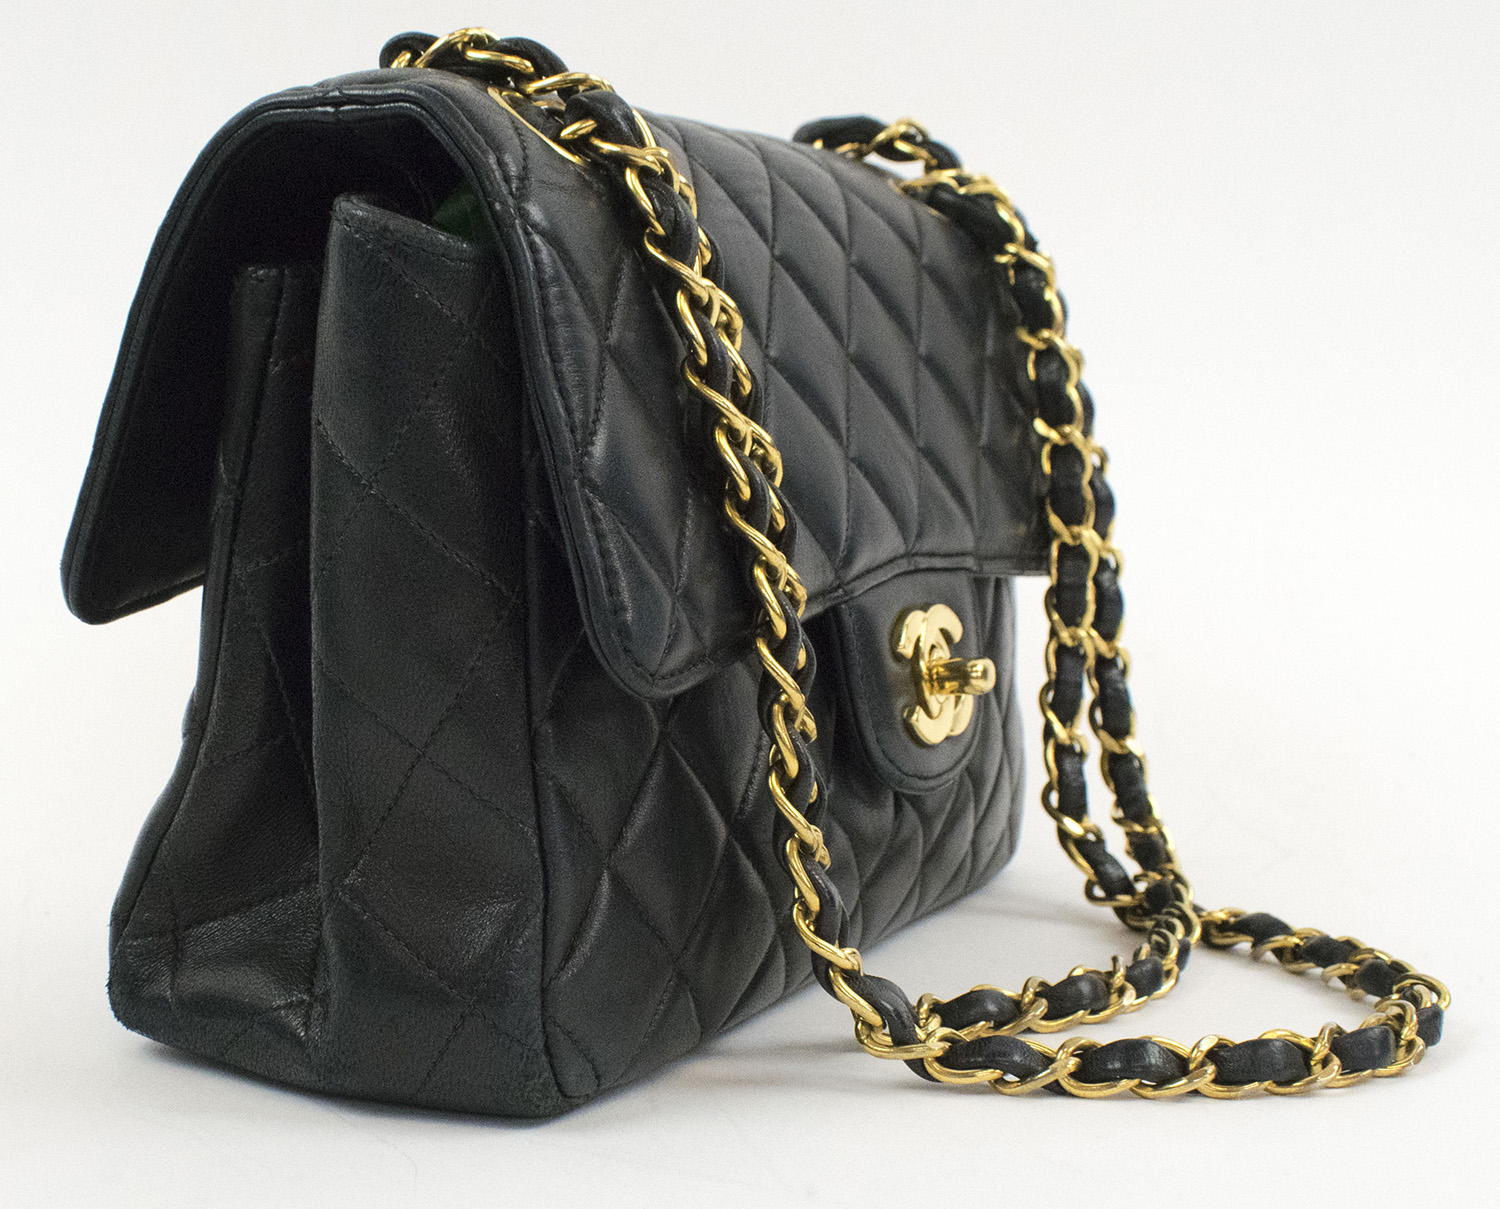 Chanel Vintage Double Sided Flap Bag